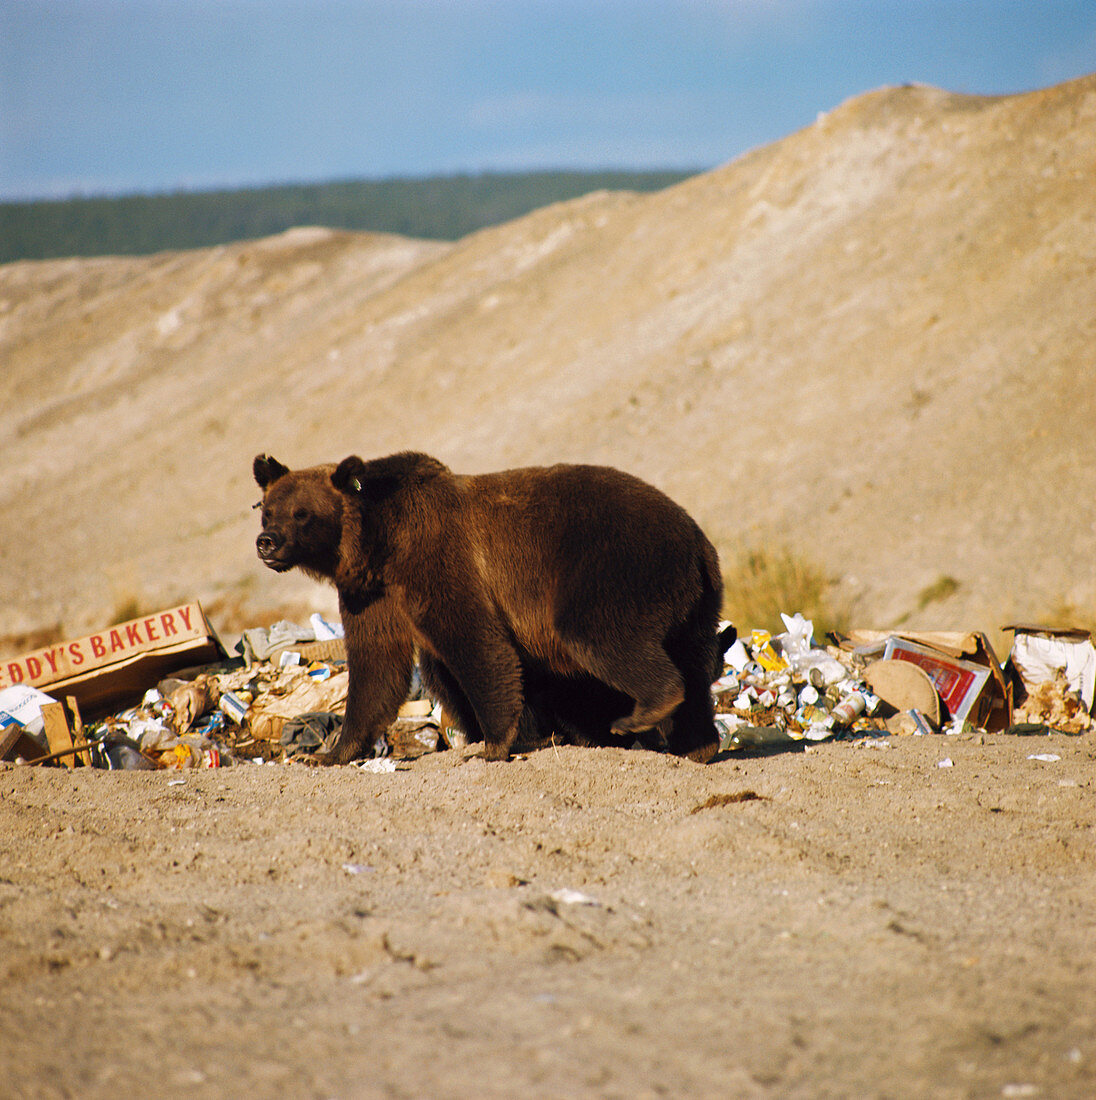 Grizzly Bear and Garbage